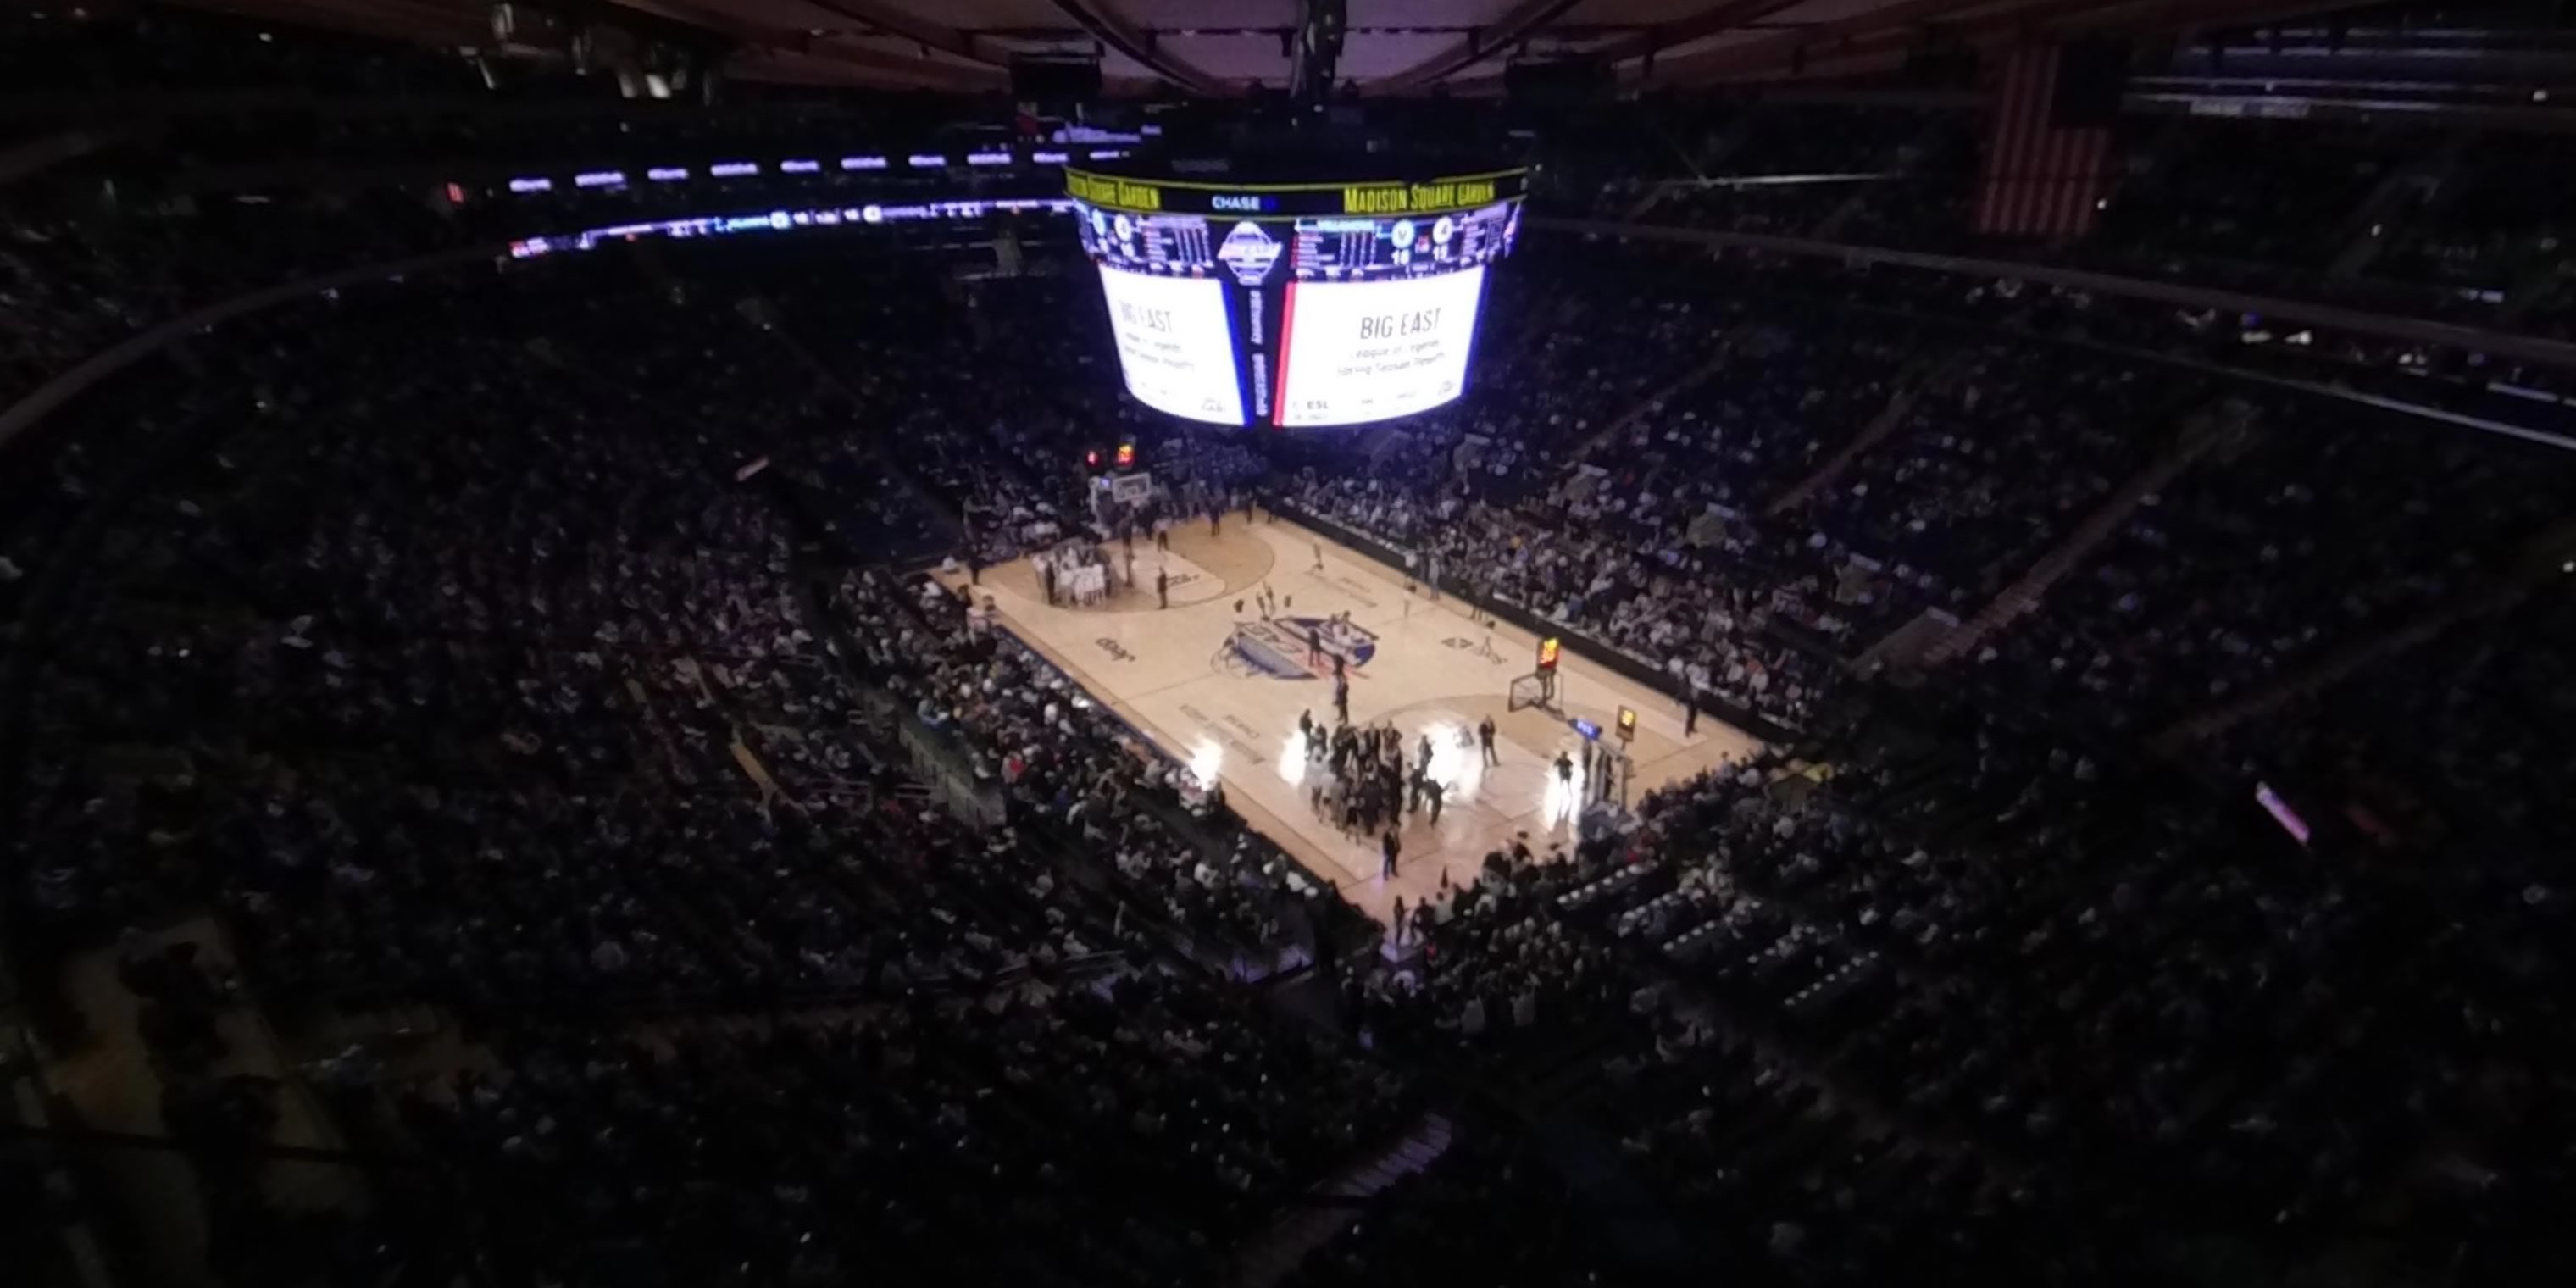 section 317 panoramic seat view  for basketball - madison square garden